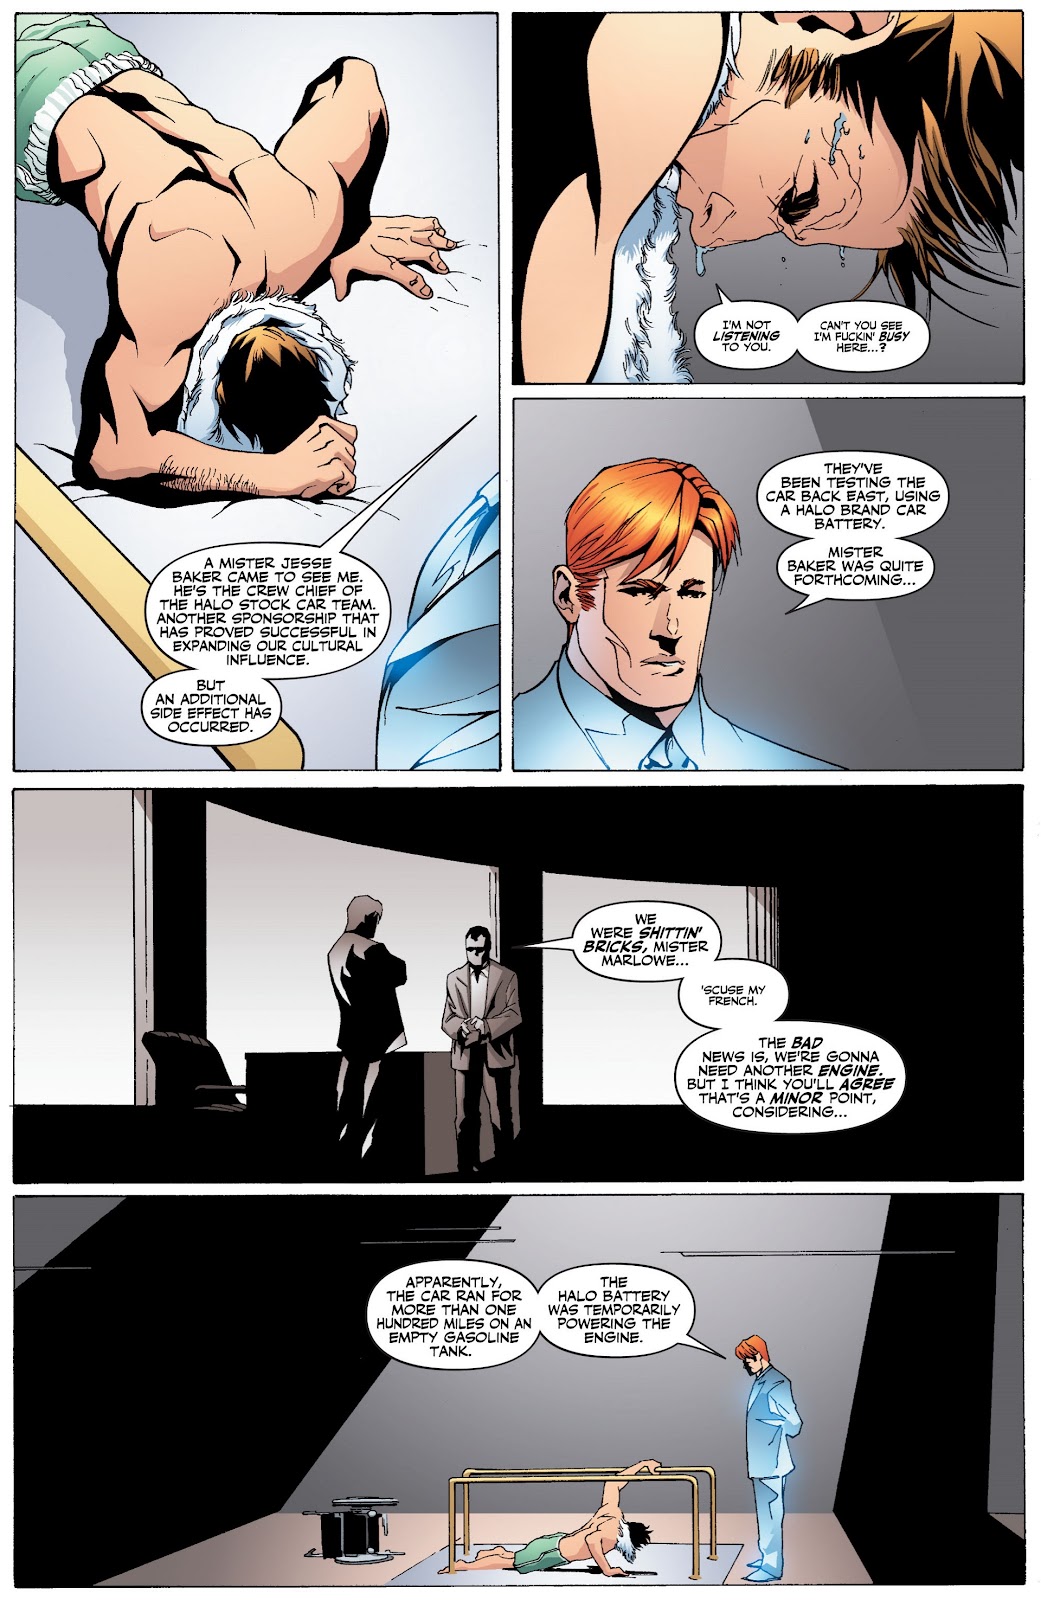 Wildcats Version 3.0 Issue #12 #12 - English 5